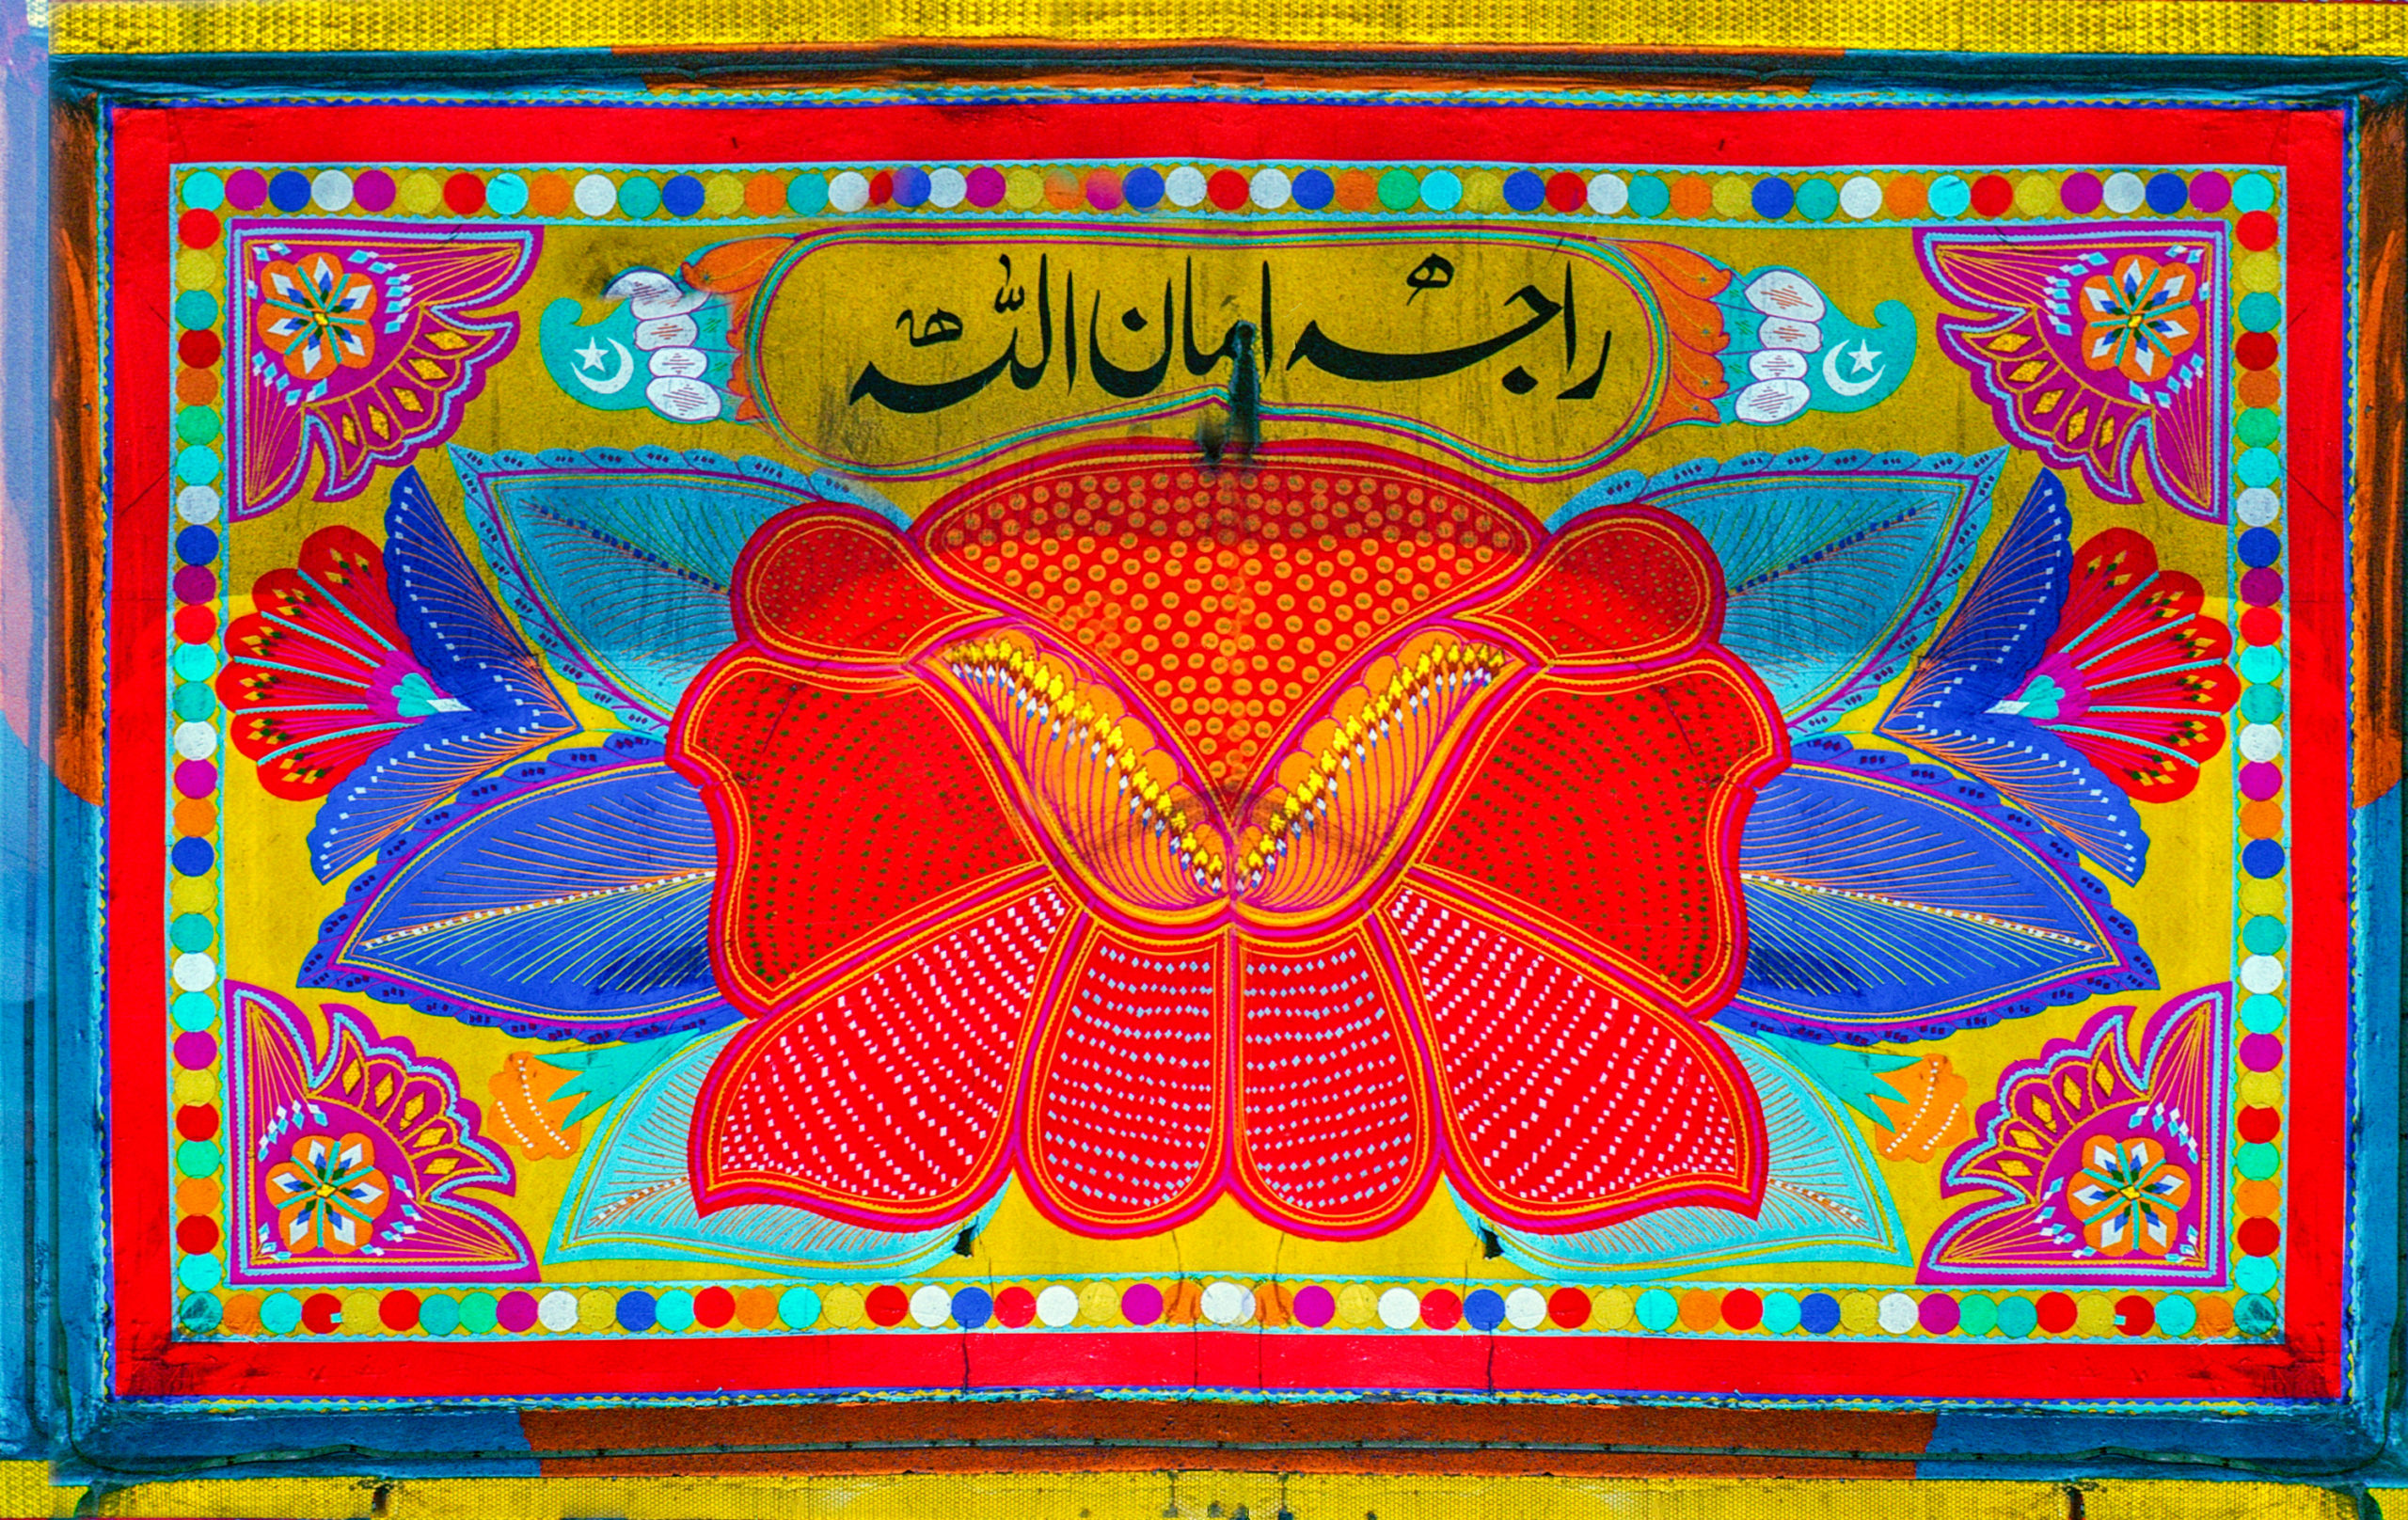 Colorful painting on the back of a Pakistani Bedford truck